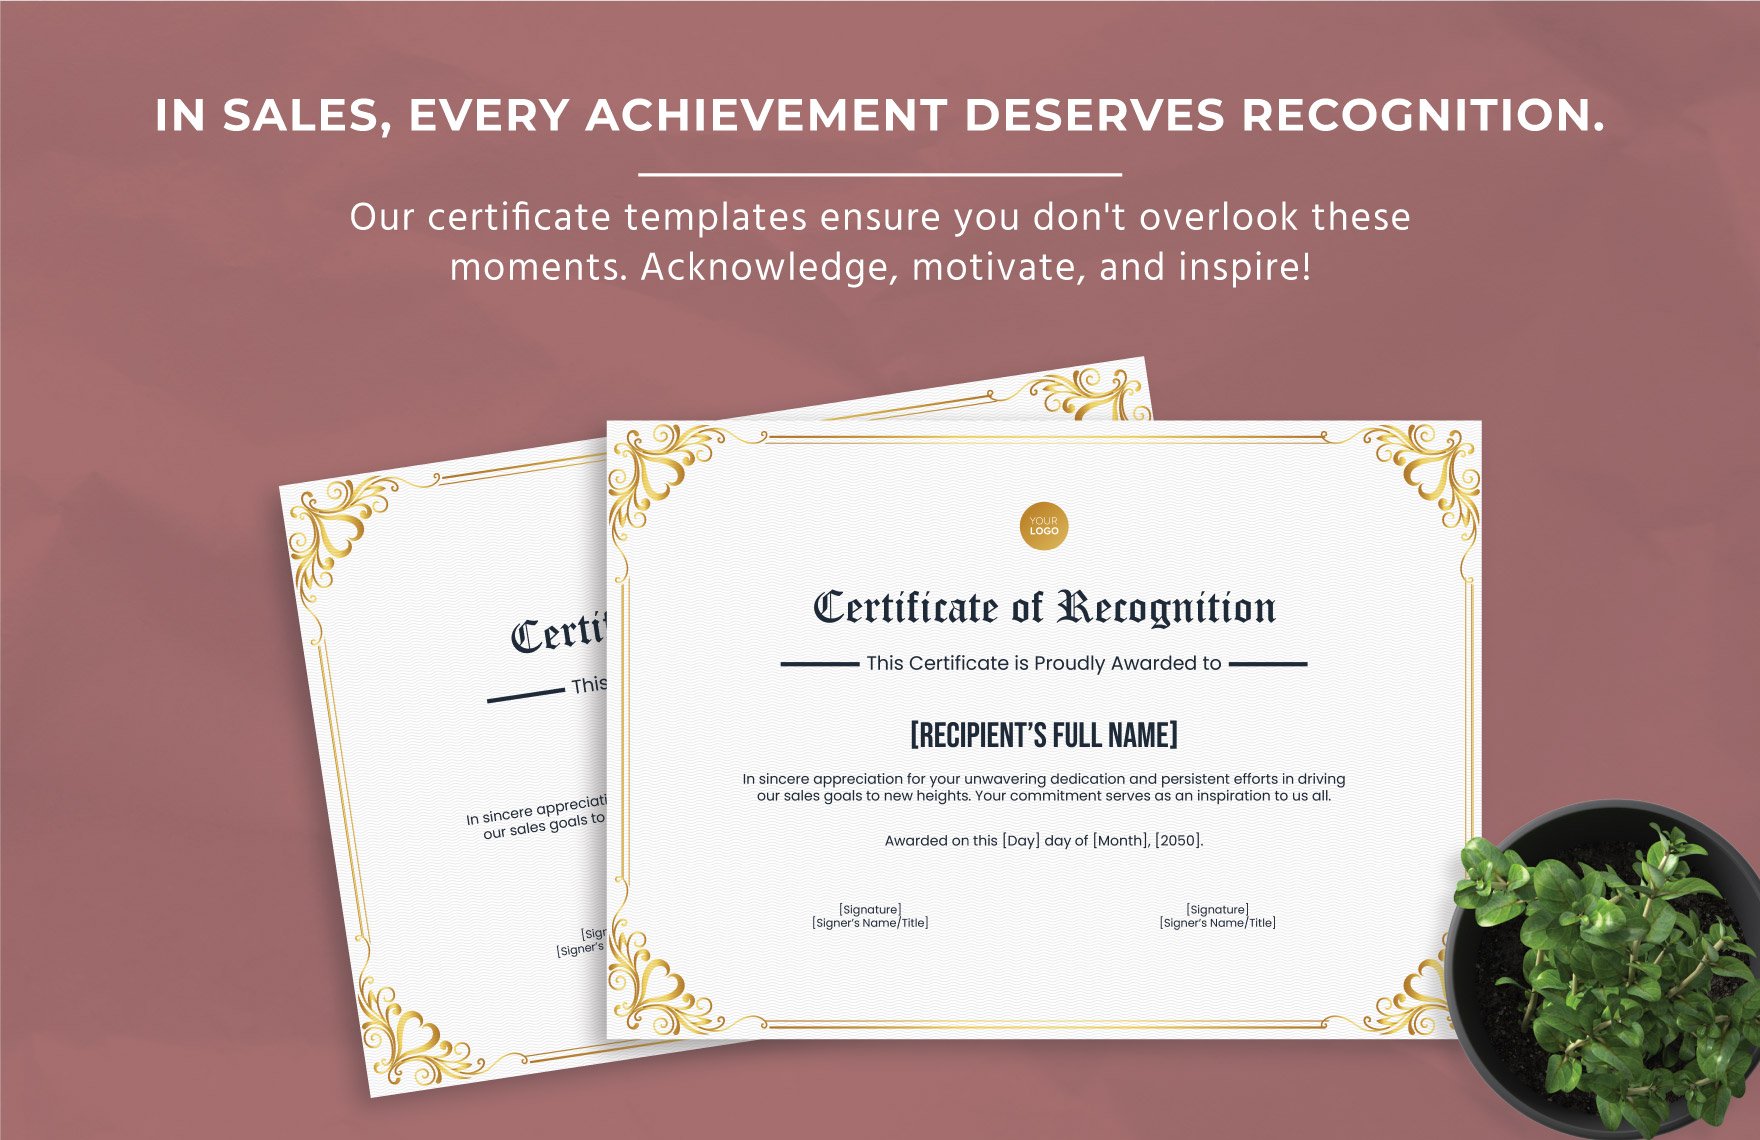 Certificate of Recognition for Sales Dedication Template